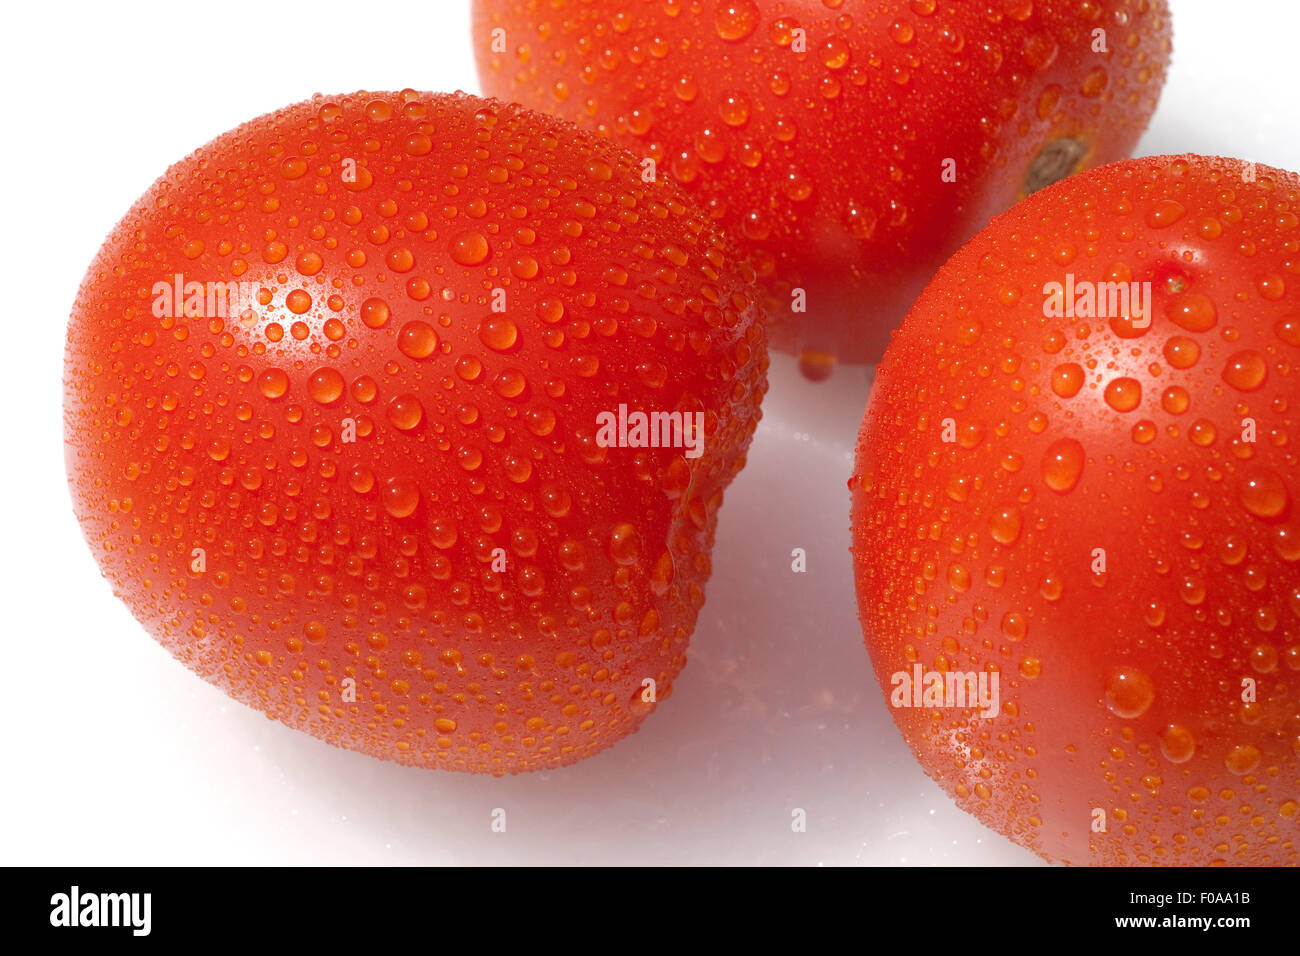 and photography images stock hi-res - Alamy Romatomaten